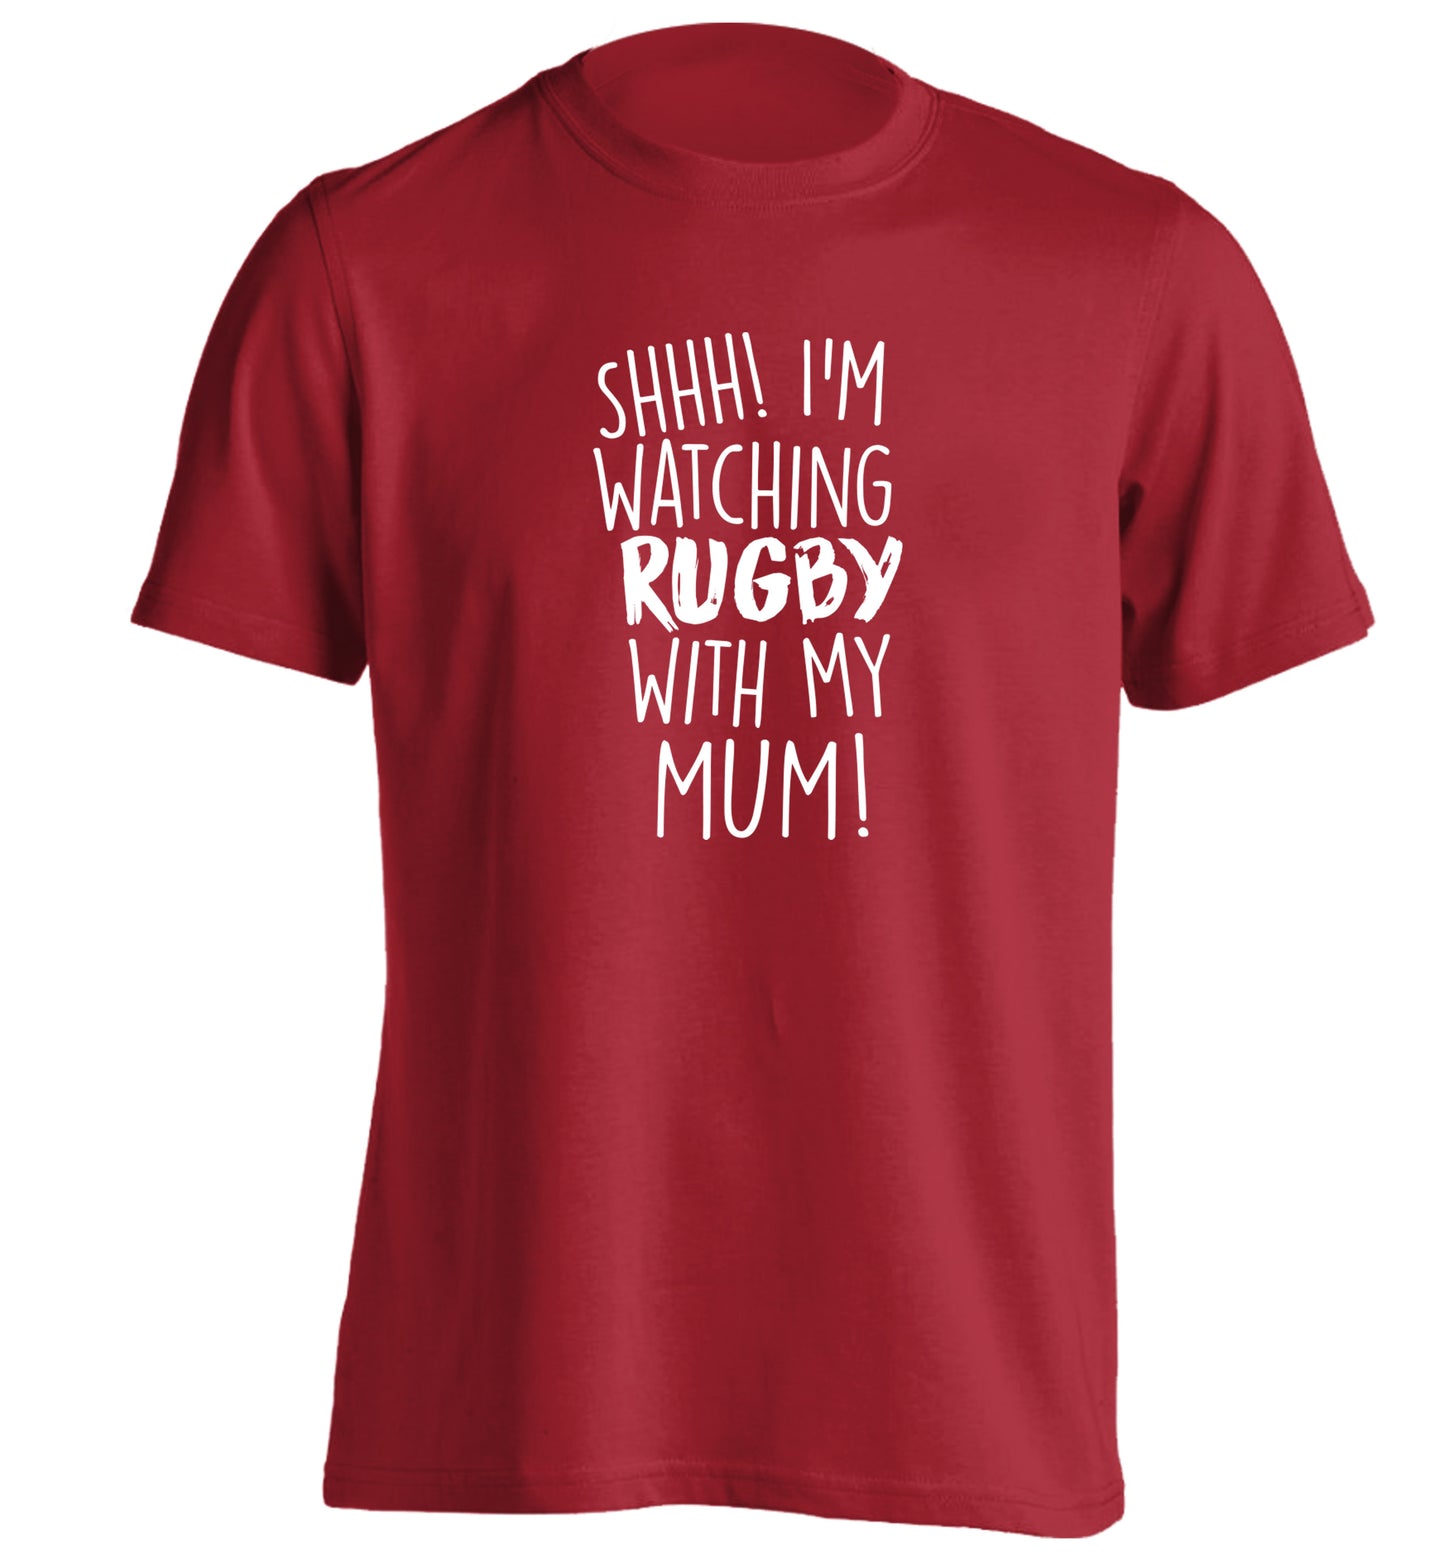 Shh... I'm watching rugby with my mum adults unisex red Tshirt 2XL